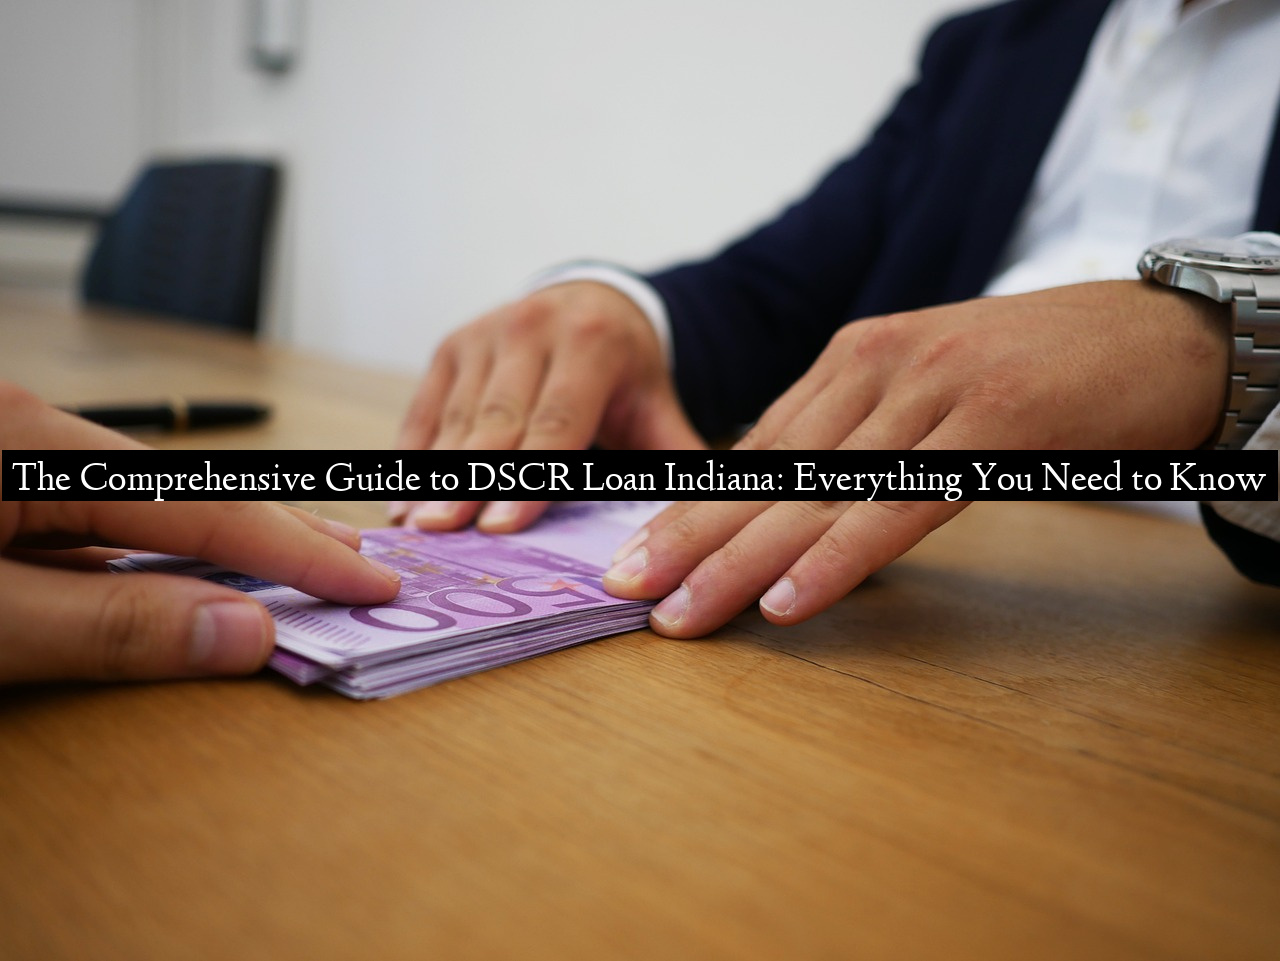 The Comprehensive Guide to DSCR Loan Indiana: Everything You Need to Know